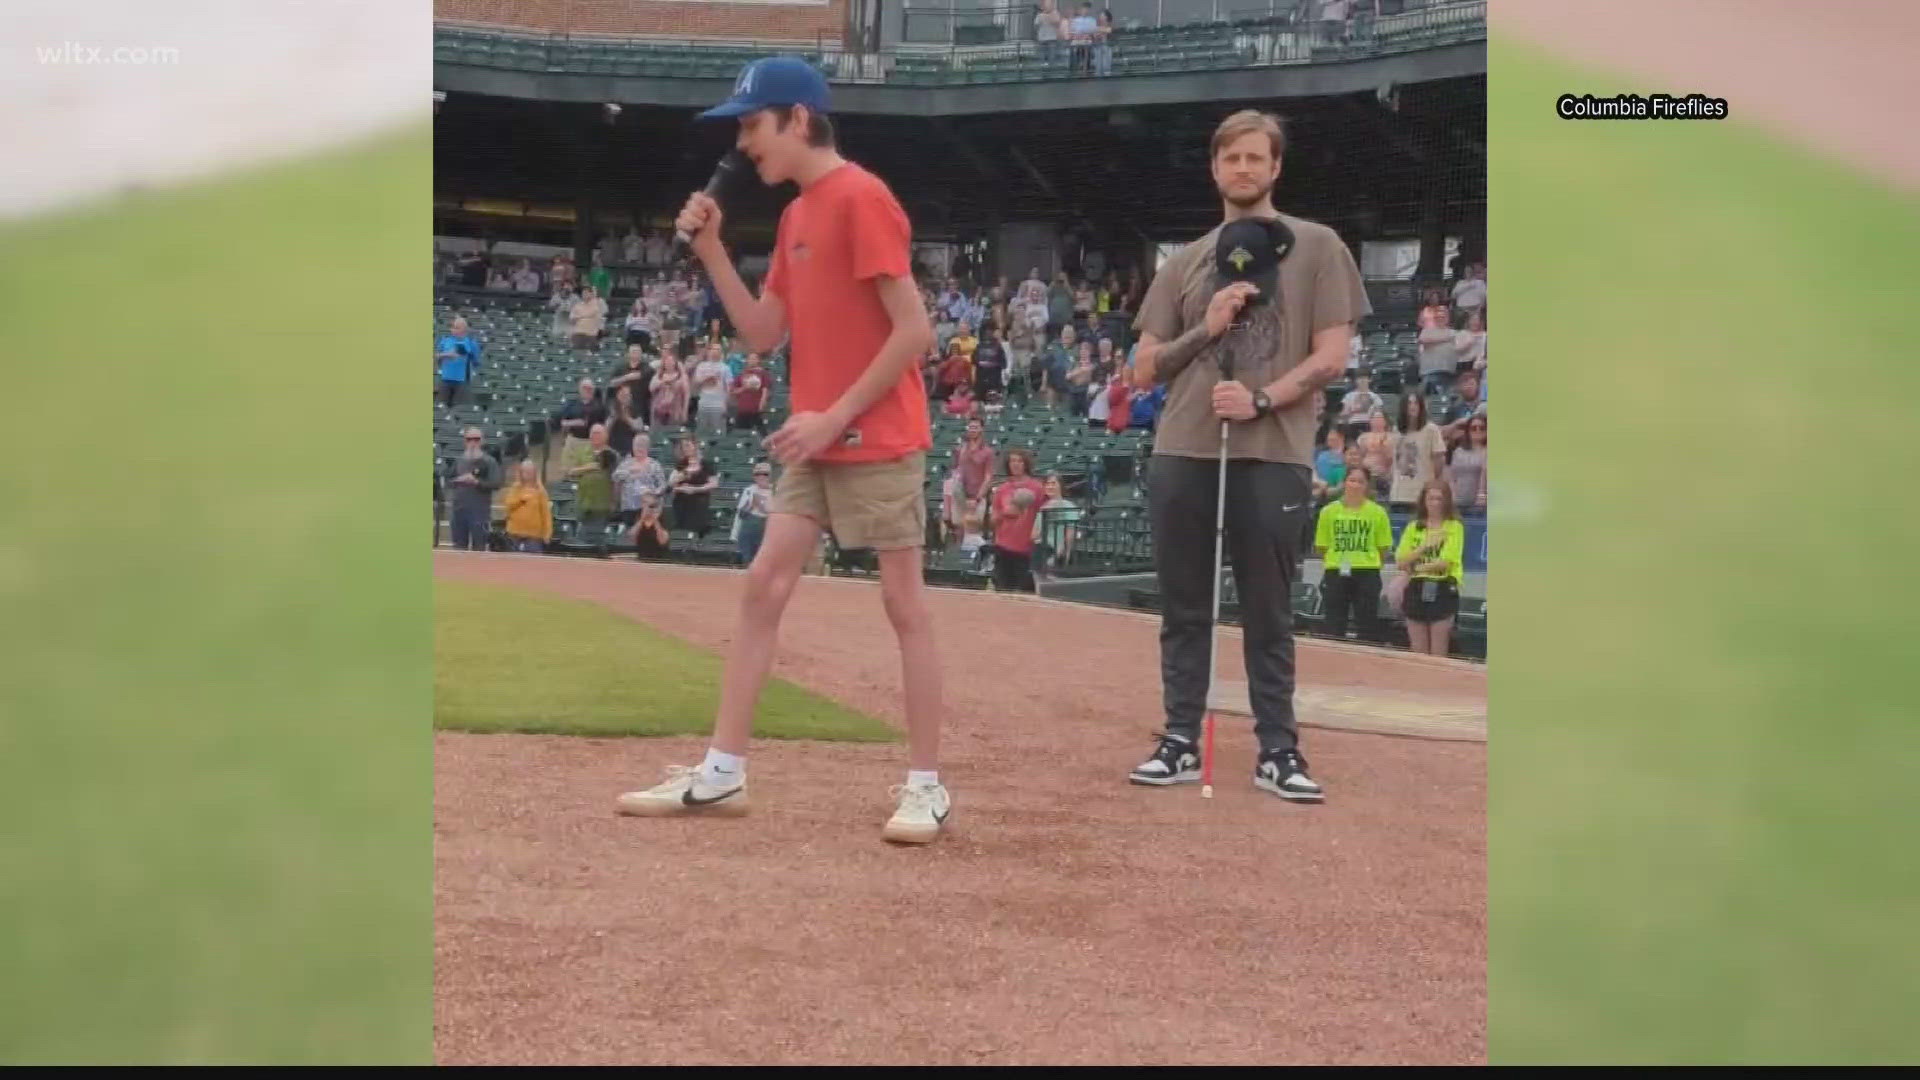 13-year-old Sawyer McCarthy captured the hearts of millions around the world after a video of him singing The National Anthem at a Columbia Fireflies game went viral